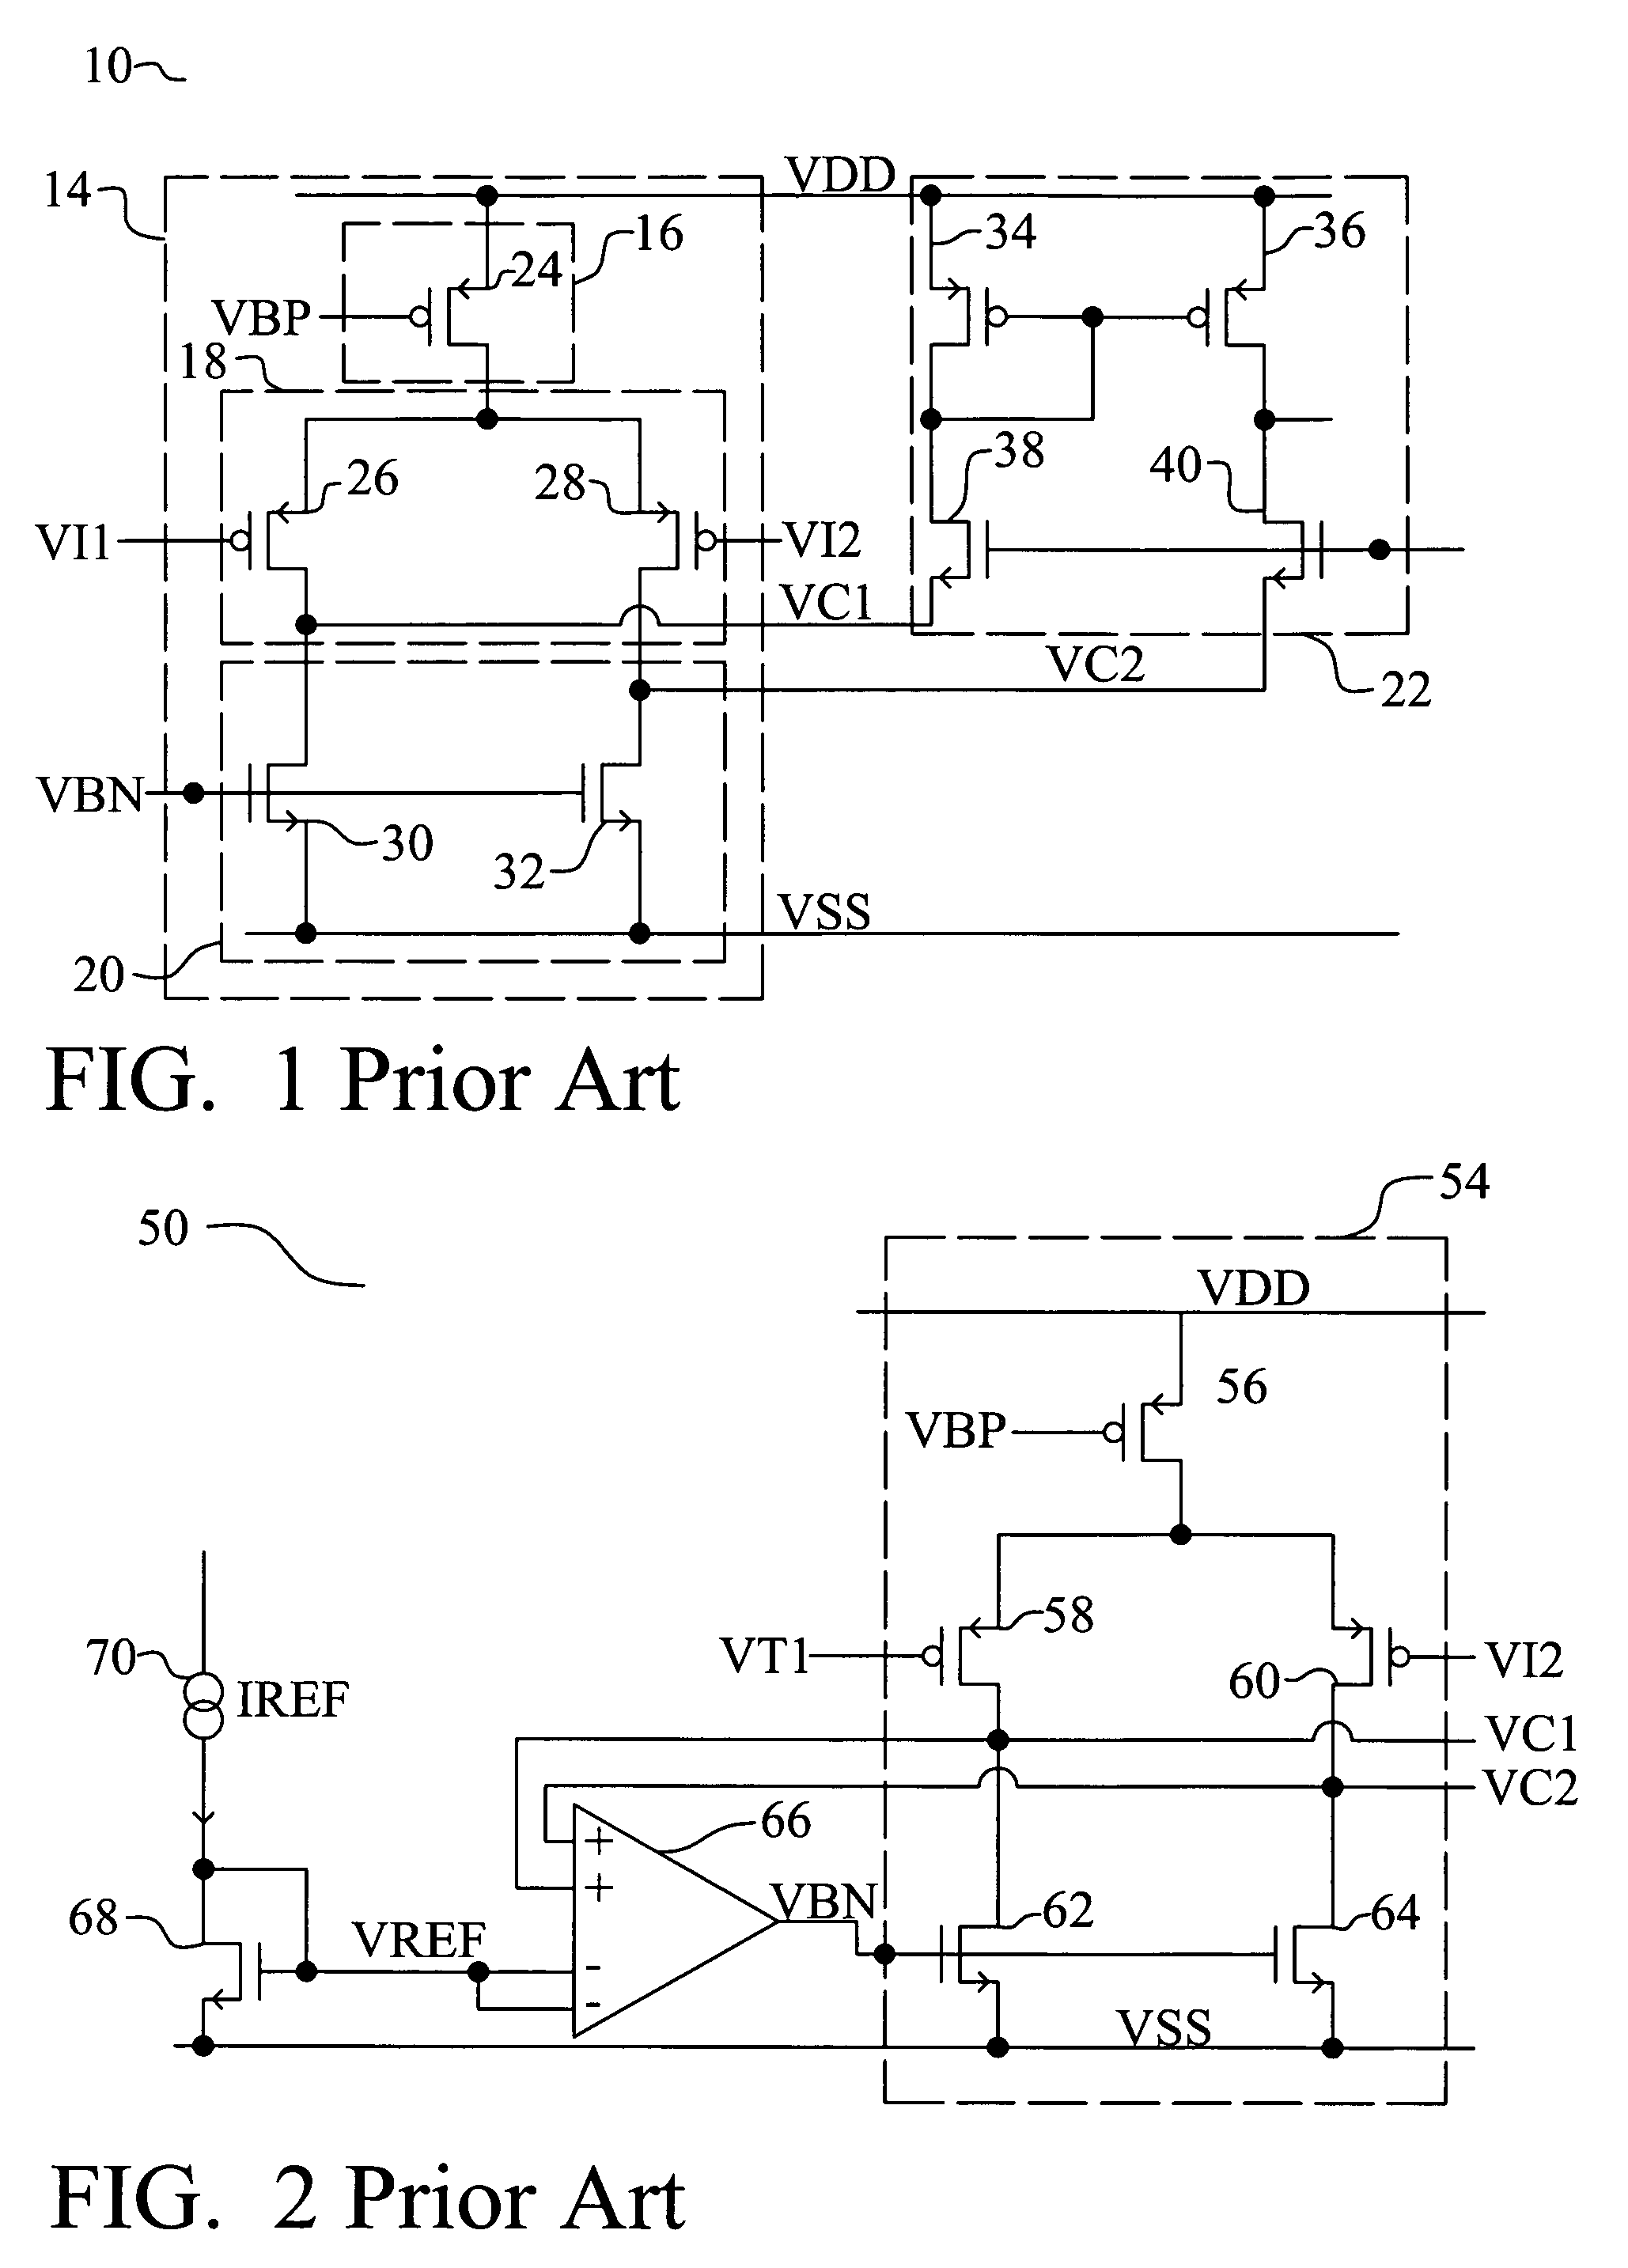 Differential gain stage for low voltage supply